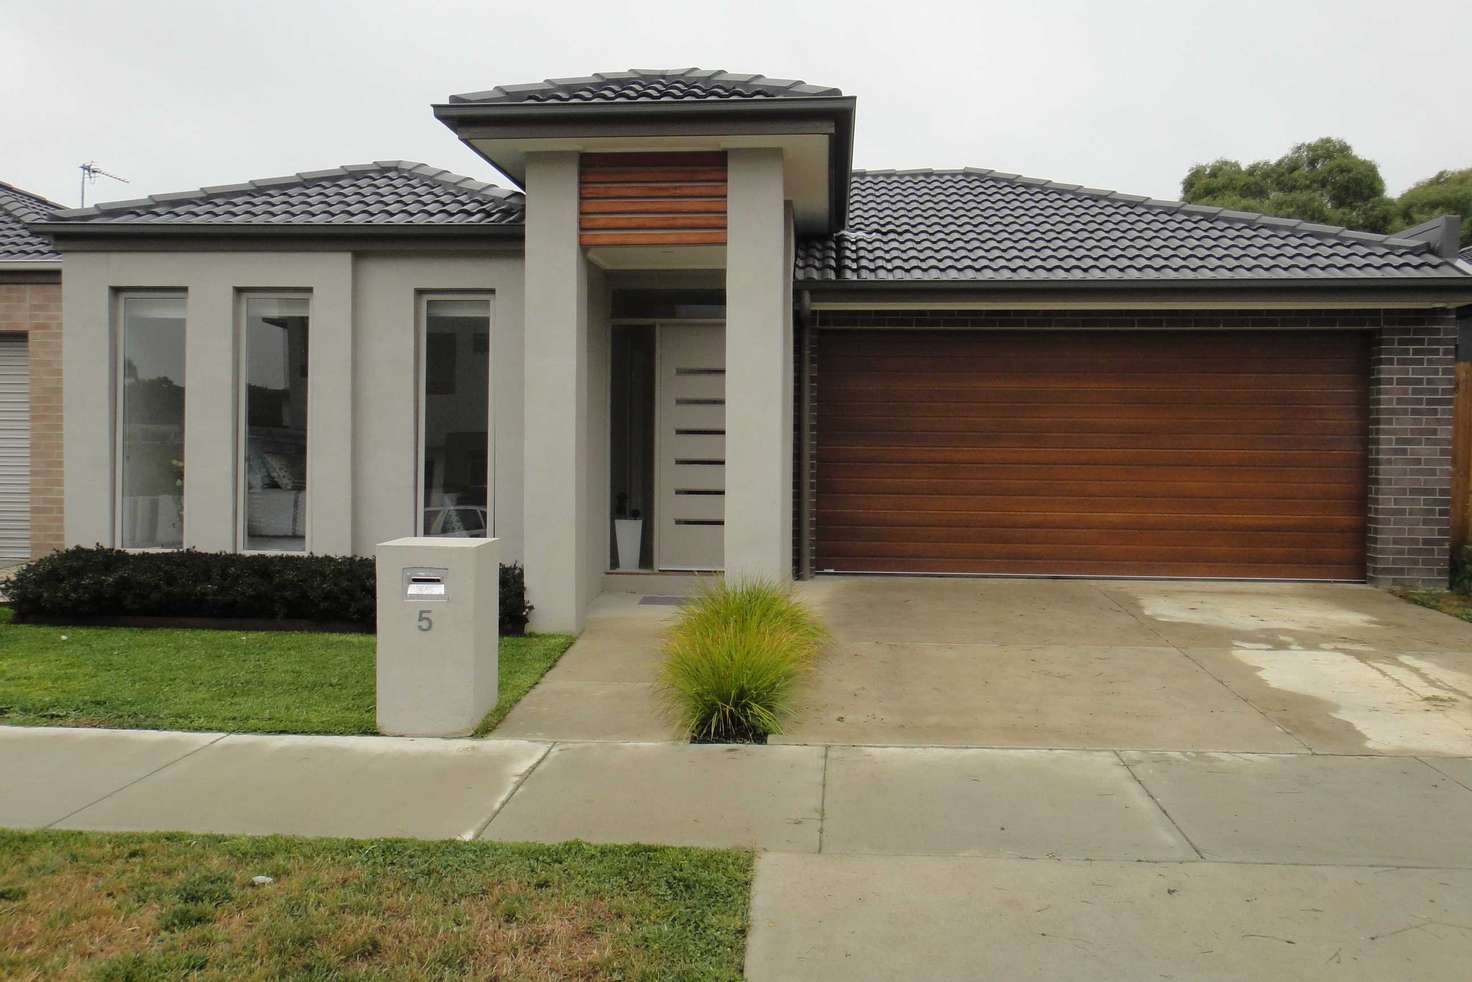 Main view of Homely house listing, 5 Cavanagh Court, Ballarat East VIC 3350